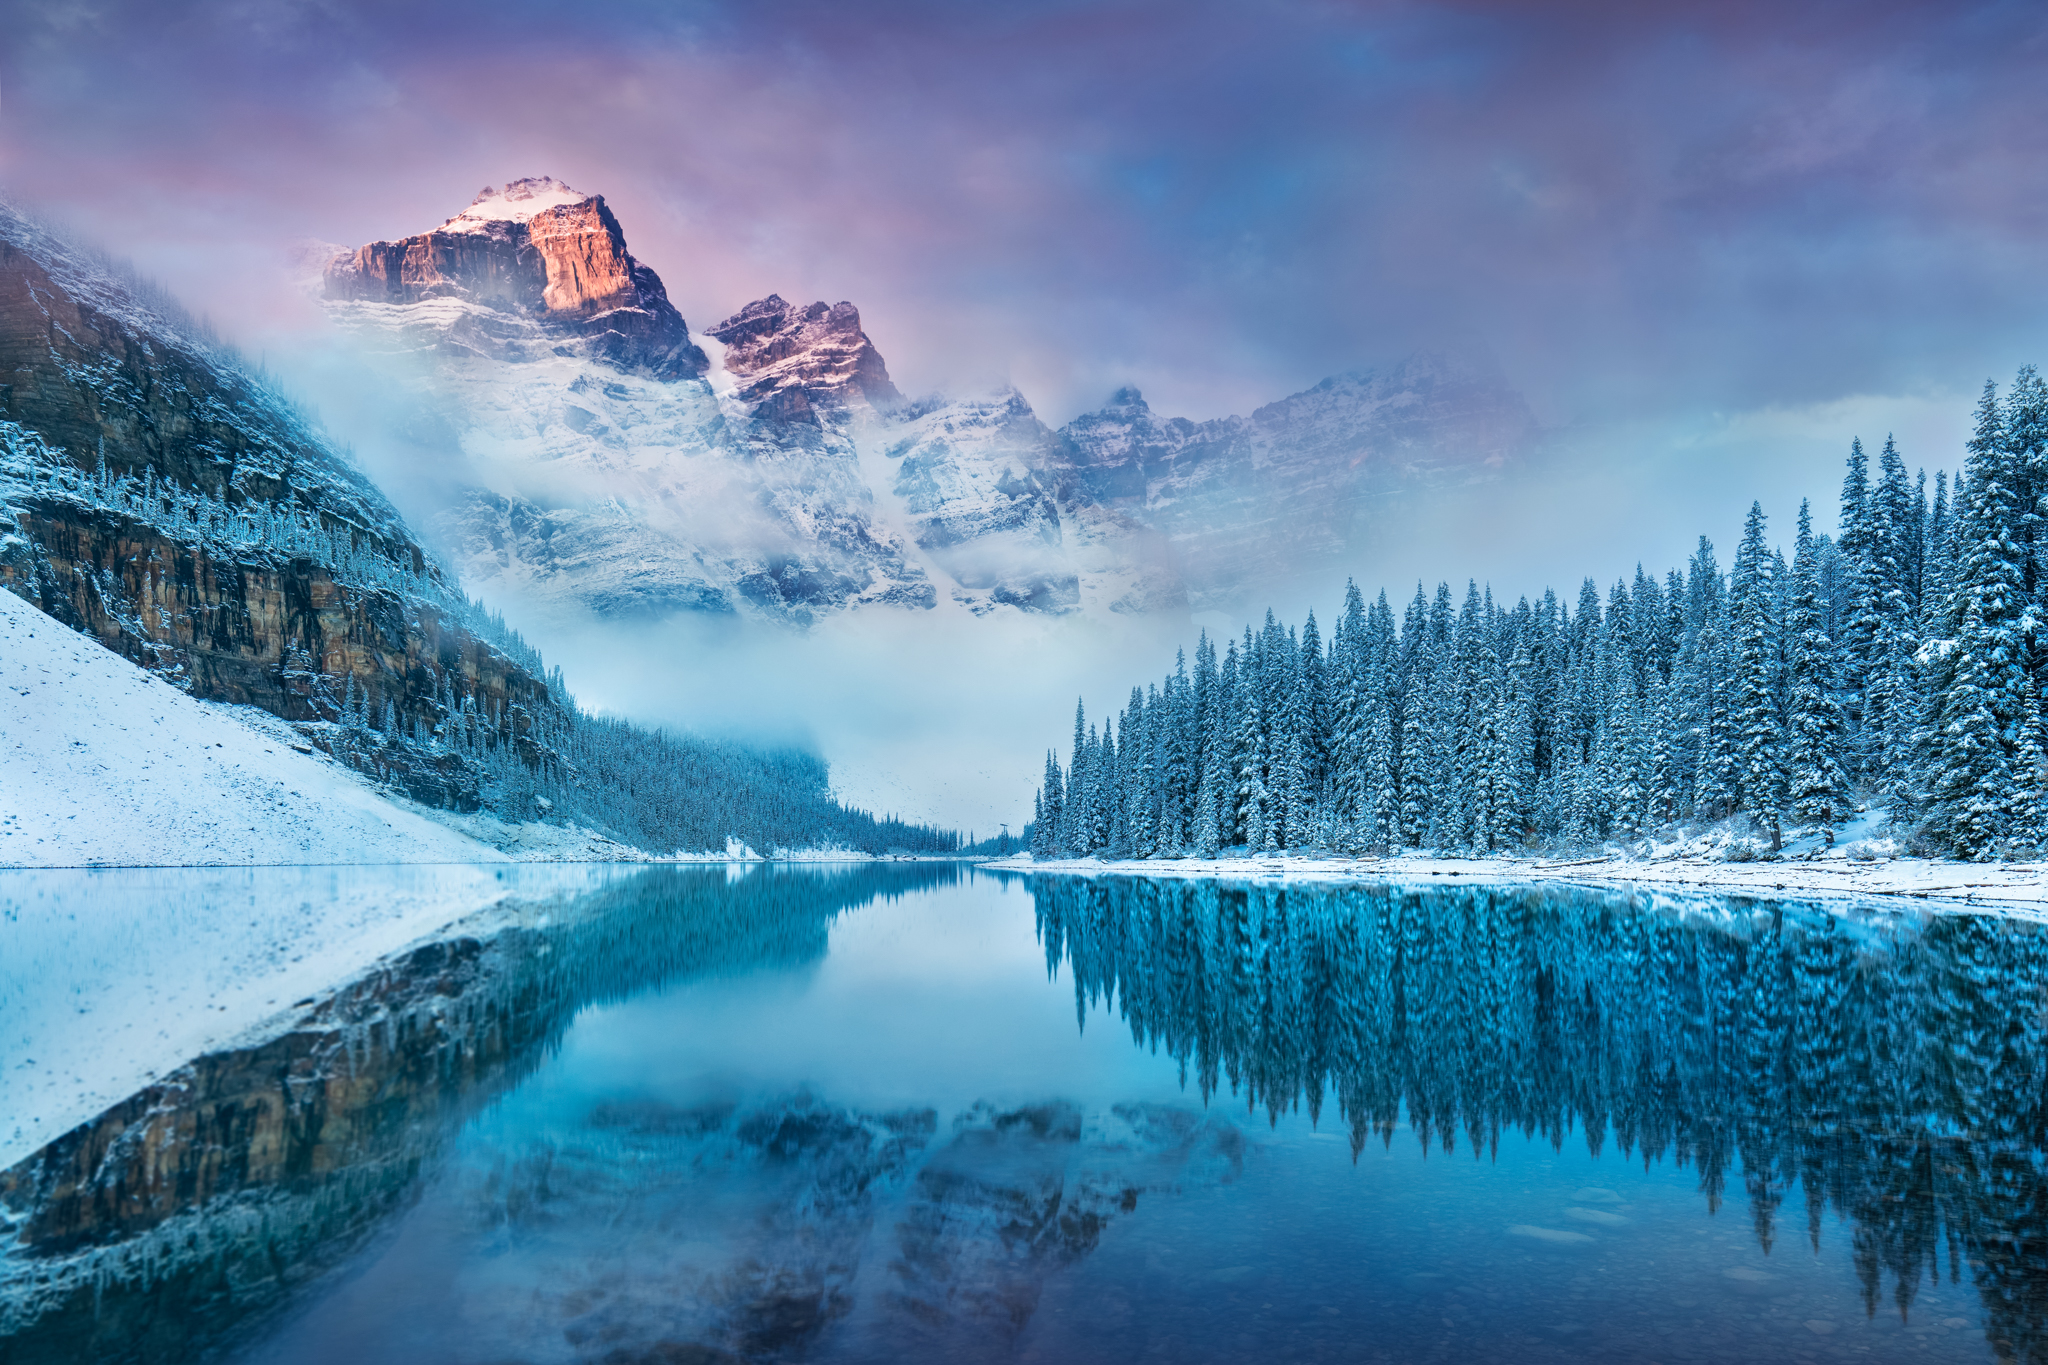 Breathtaking view of Moraine Lake with rugged snow capped peaks